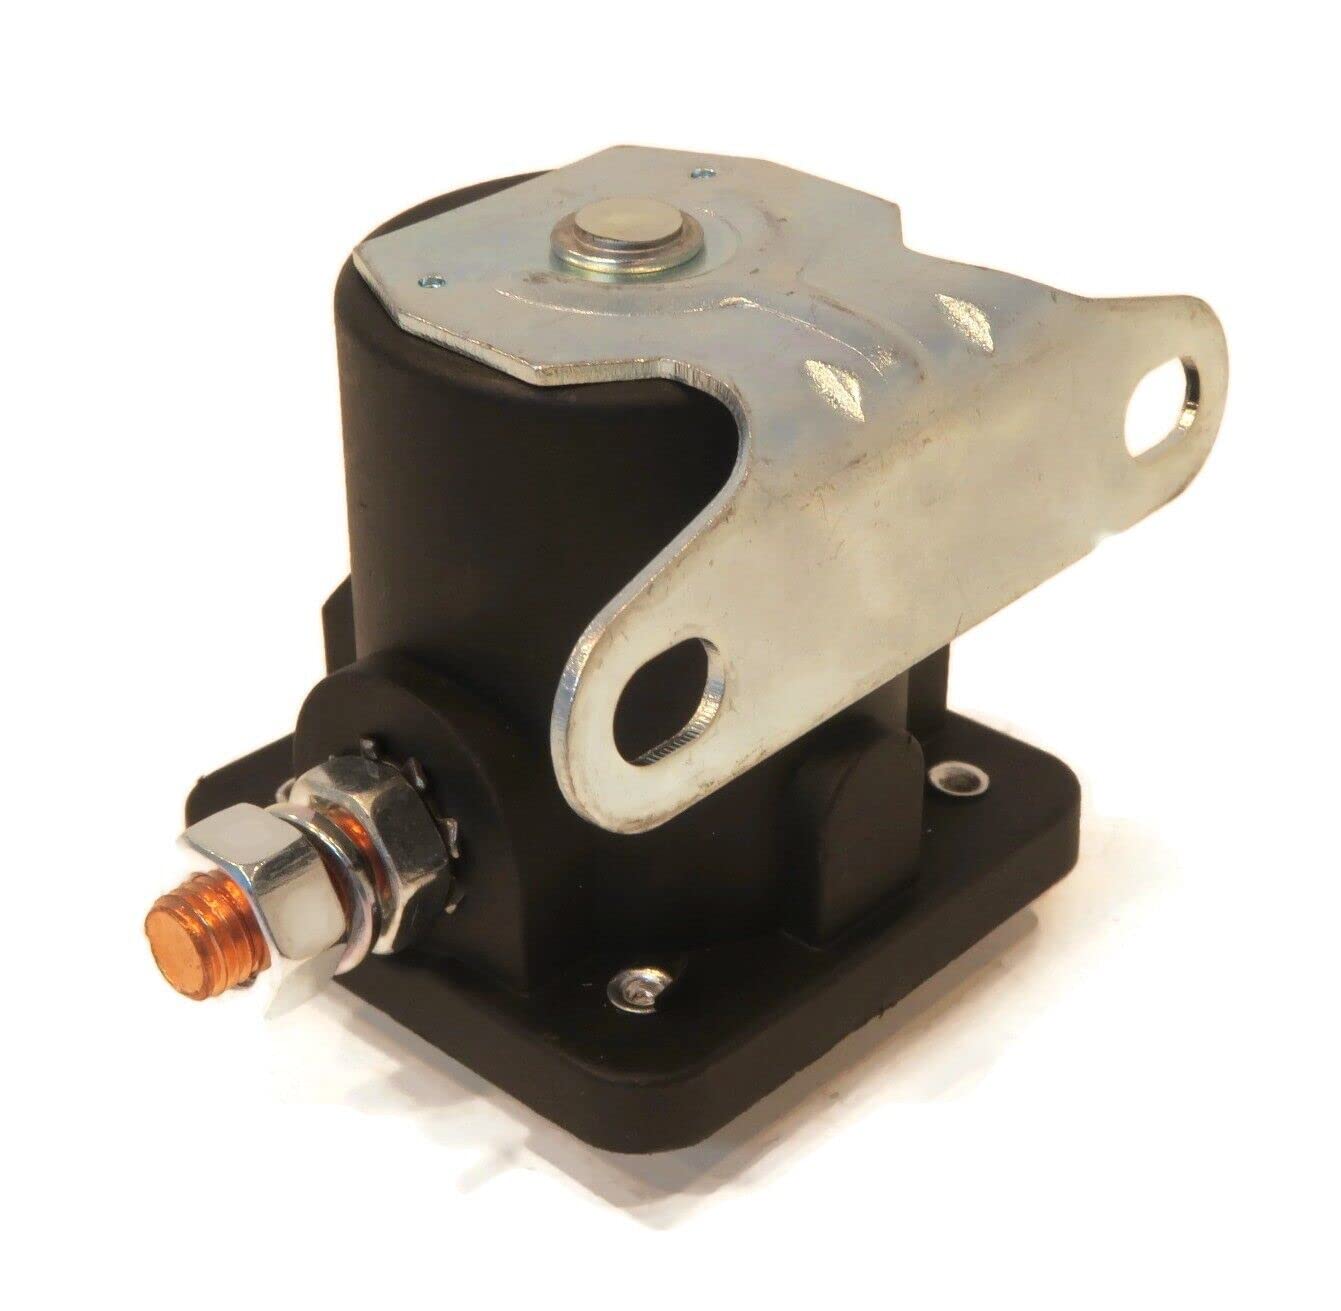 The ROP Shop | [Pack of 5] Motor Control 12V Motor Solenoid, 1306070 for Maxim 412301 Plow